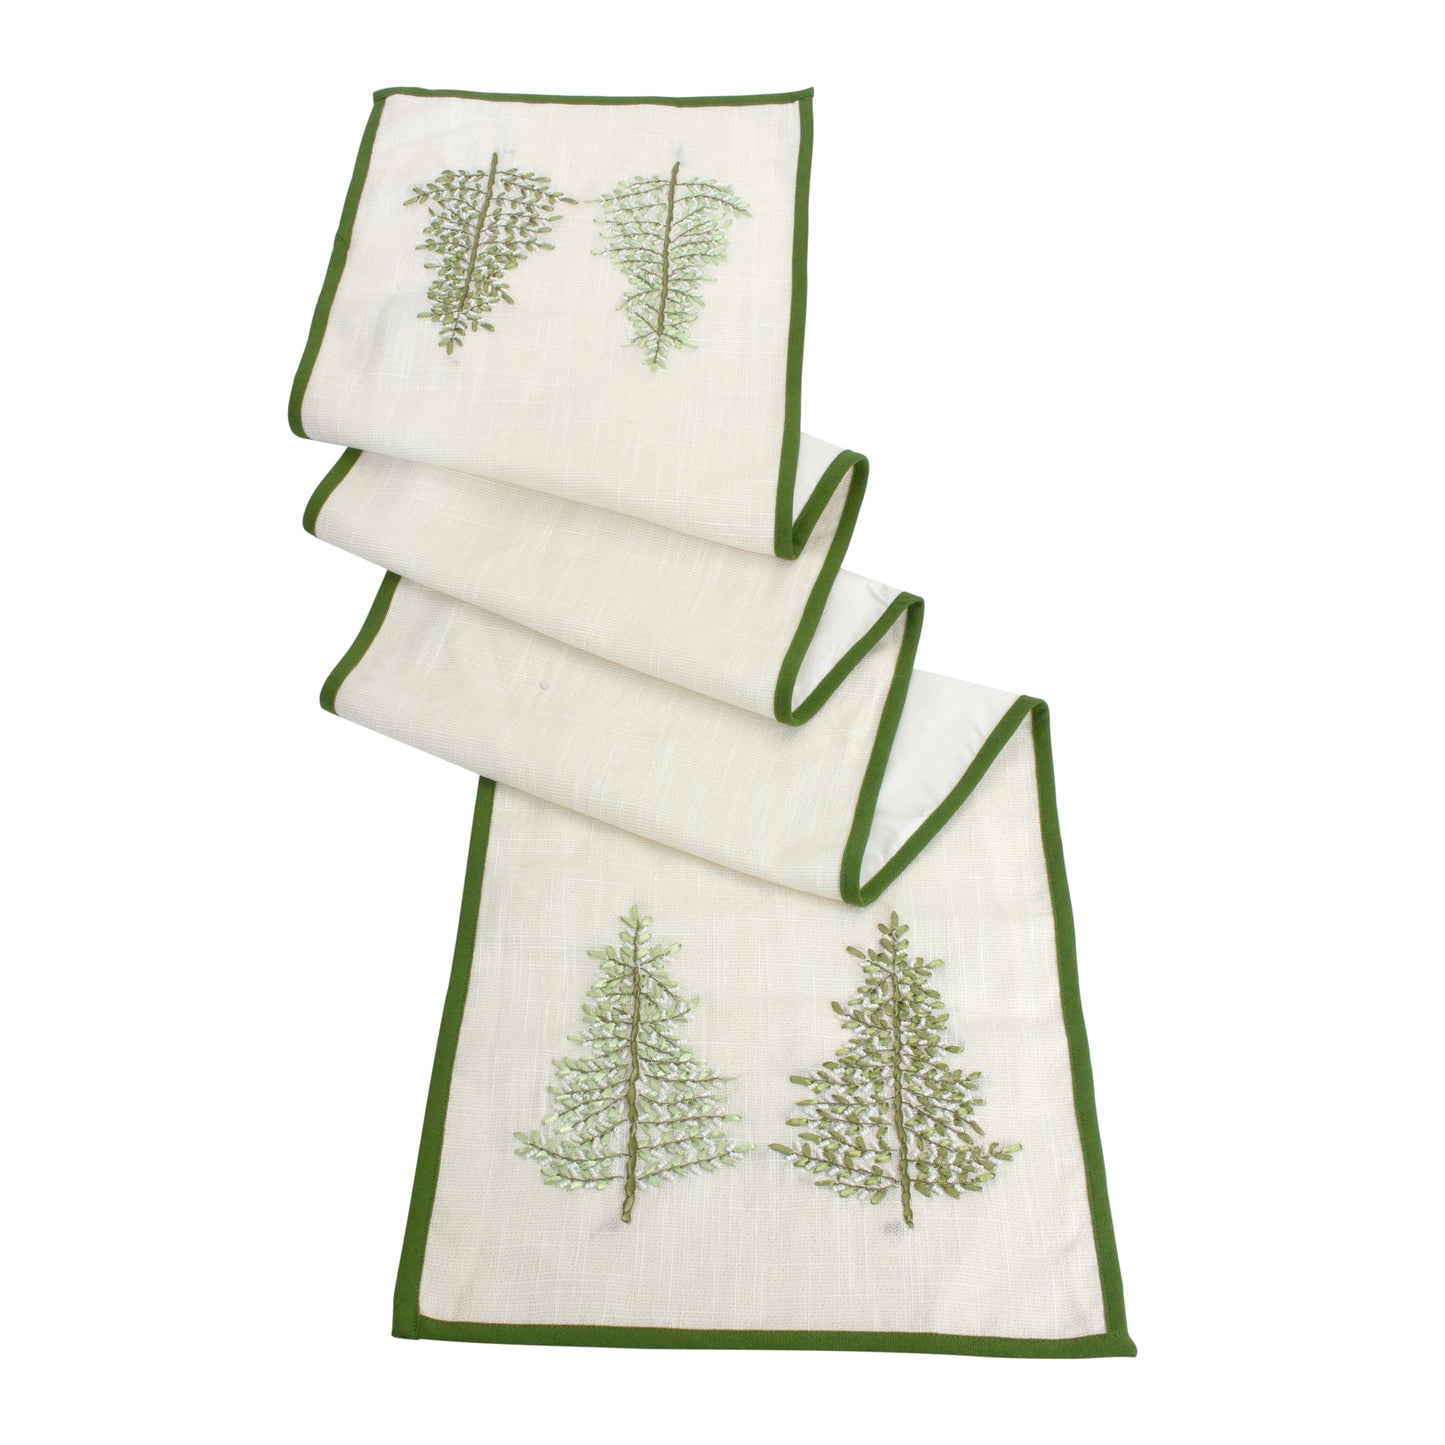 Embroidered Pine Tree Table Runner 72"L